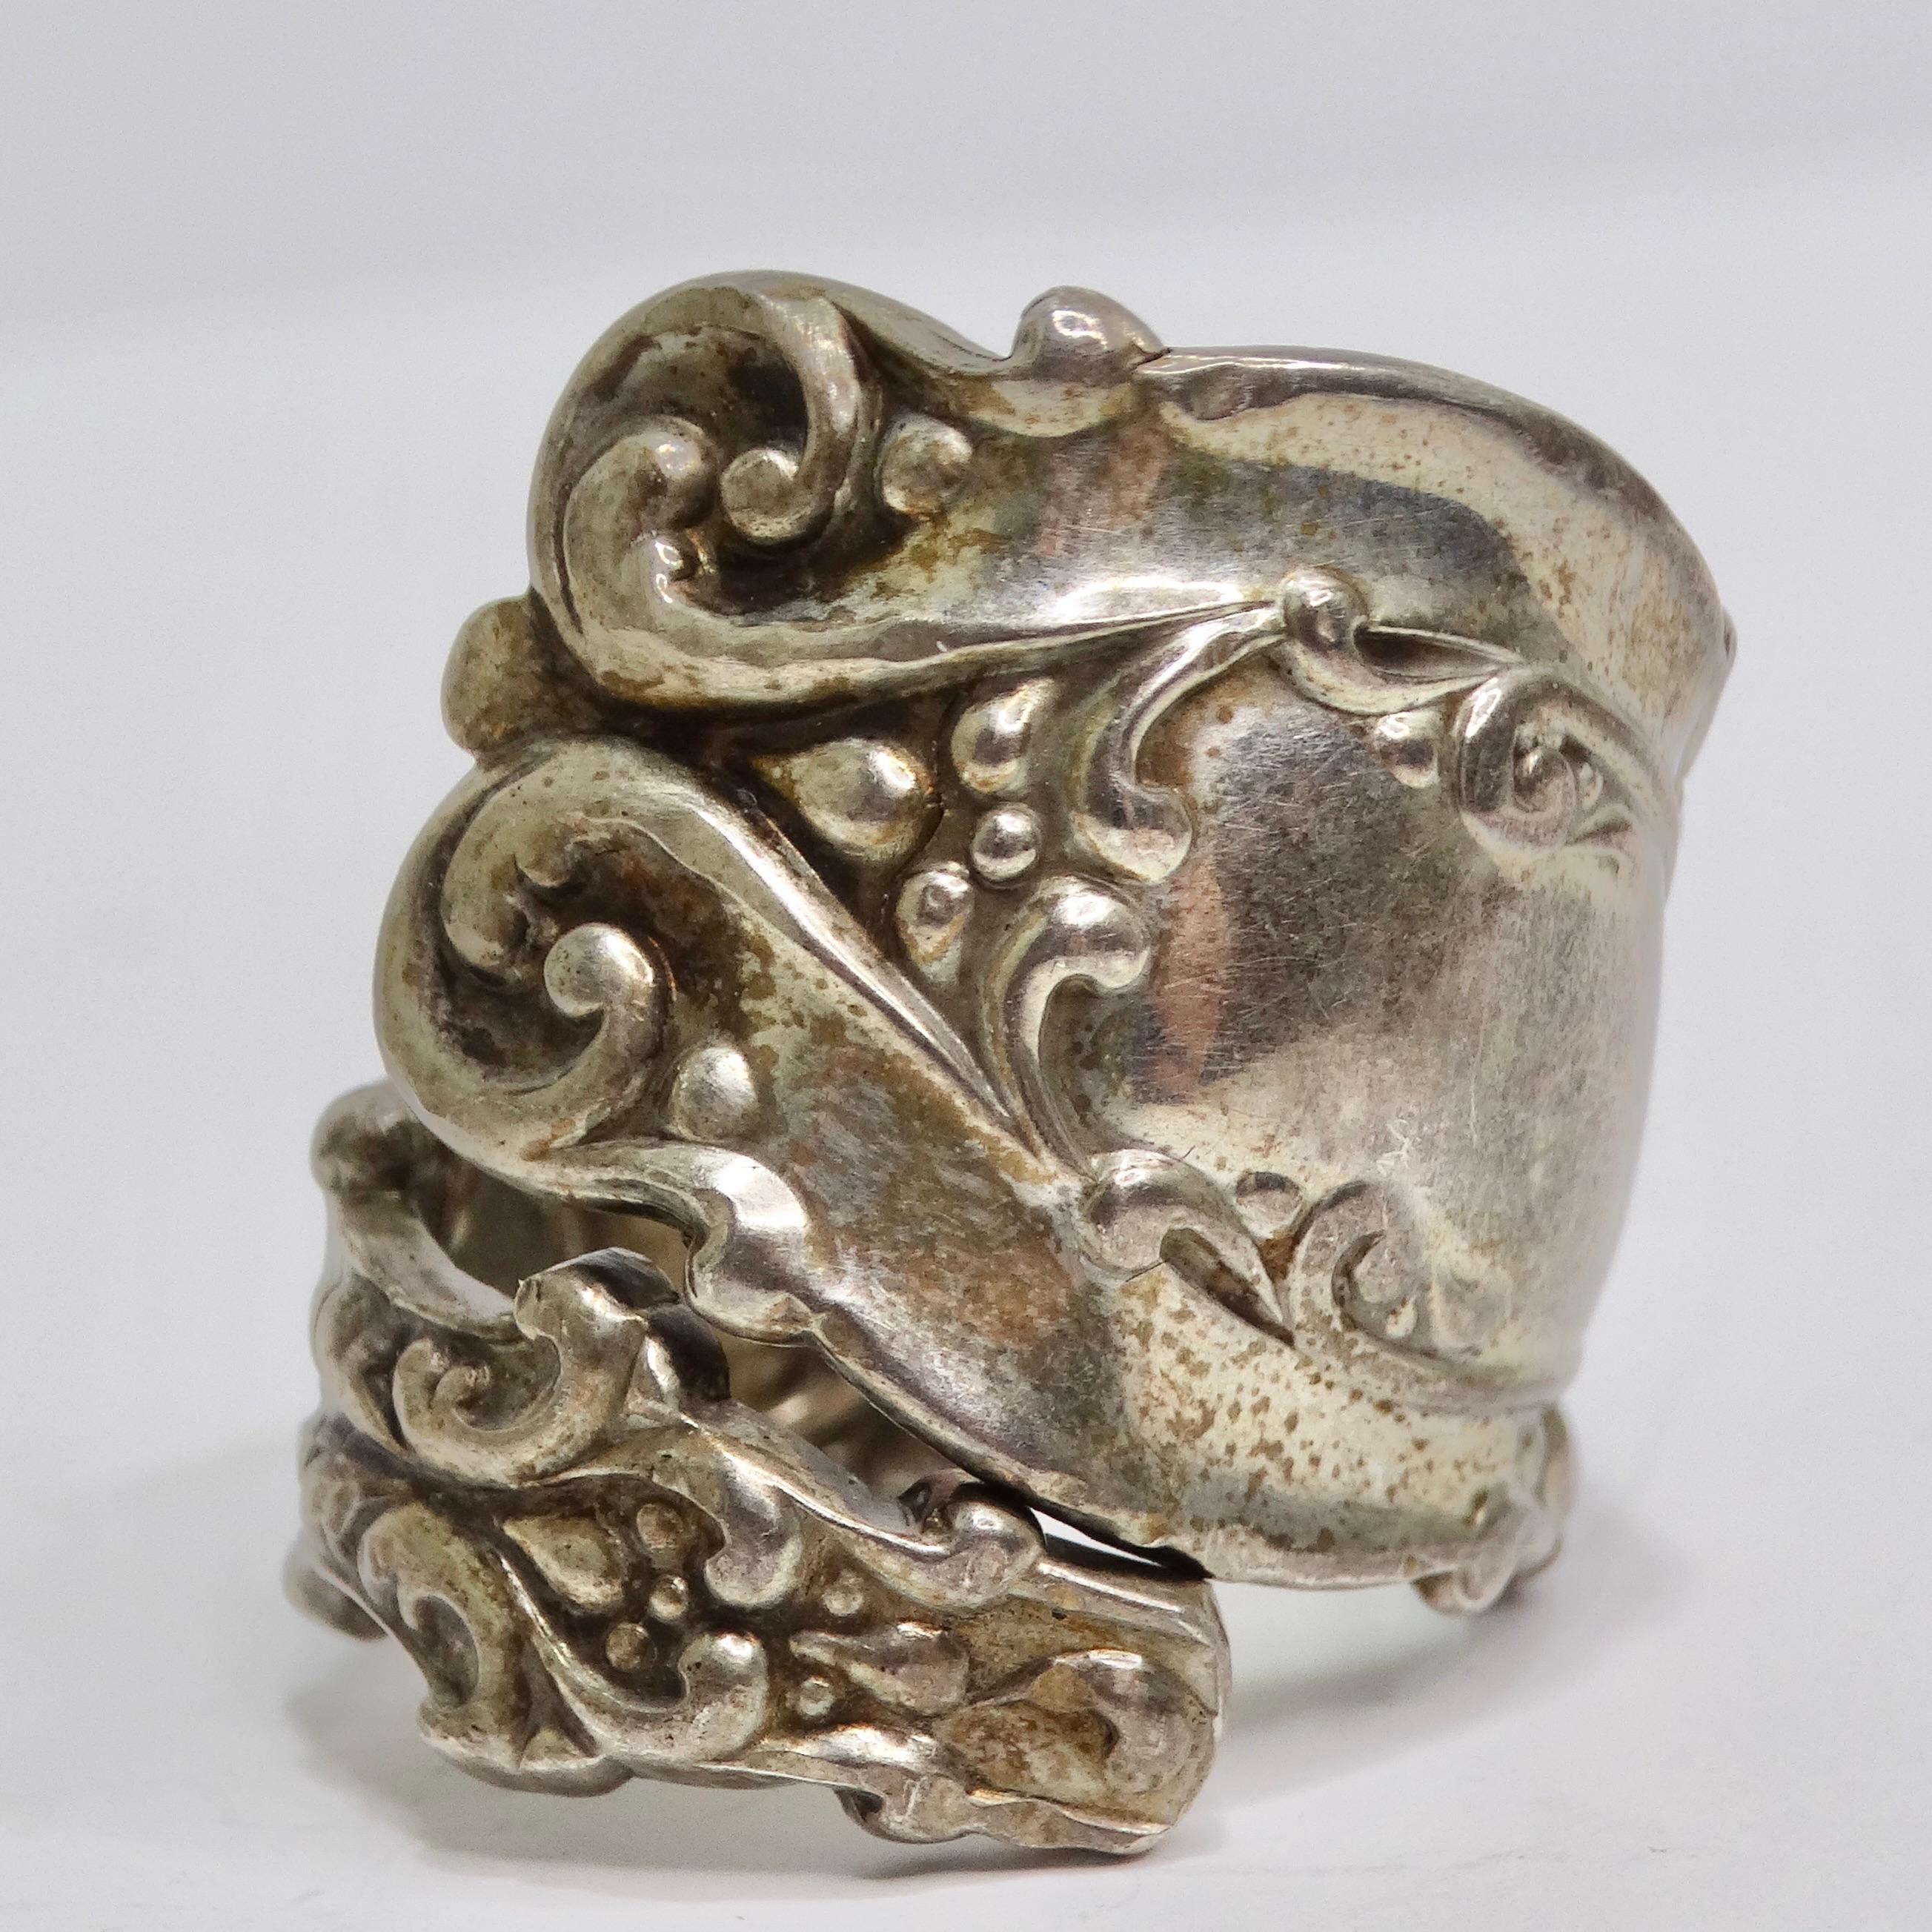 Elevate your style with our 1940s Reconstructed Silver Spoon Ring, a truly unique and one-of-a-kind piece of jewelry. Crafted from a reworked antique silver spoon, this ring is a special and exquisite accessory that pays homage to the past while